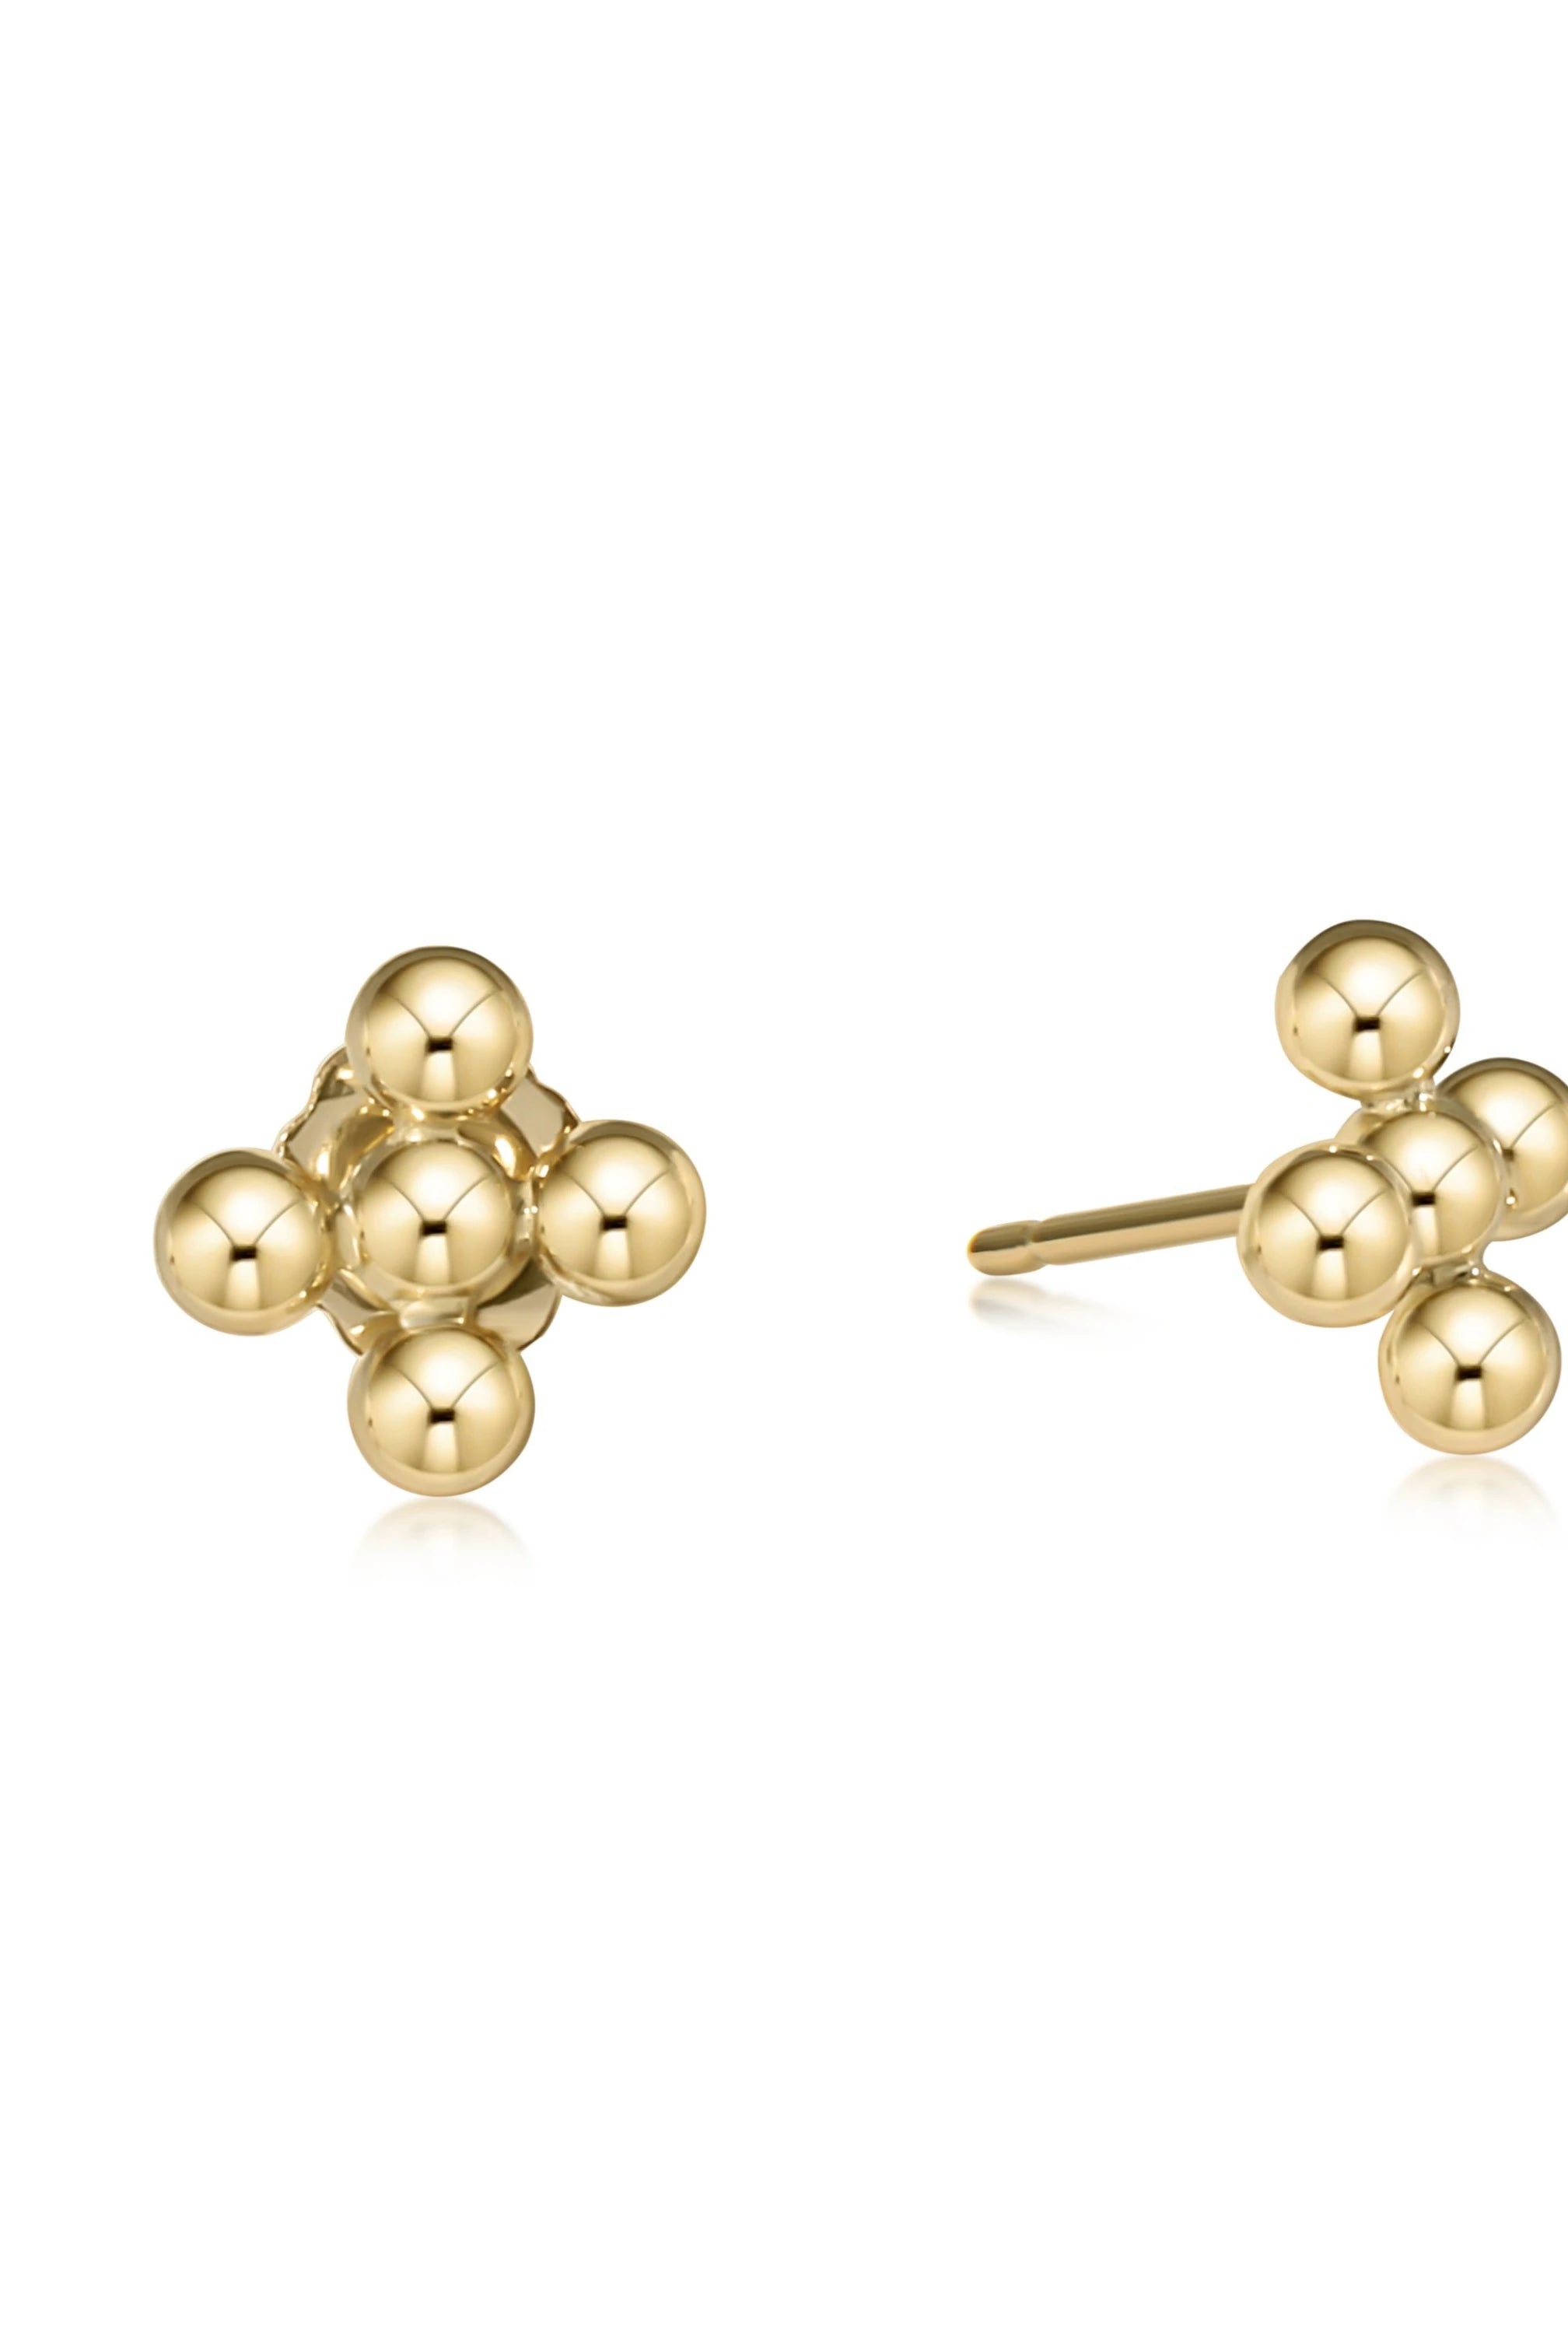 Classic 4mm Beaded Signature Cross Stud-Earrings-eNewton-The Lovely Closet, Women's Fashion Boutique in Alexandria, KY